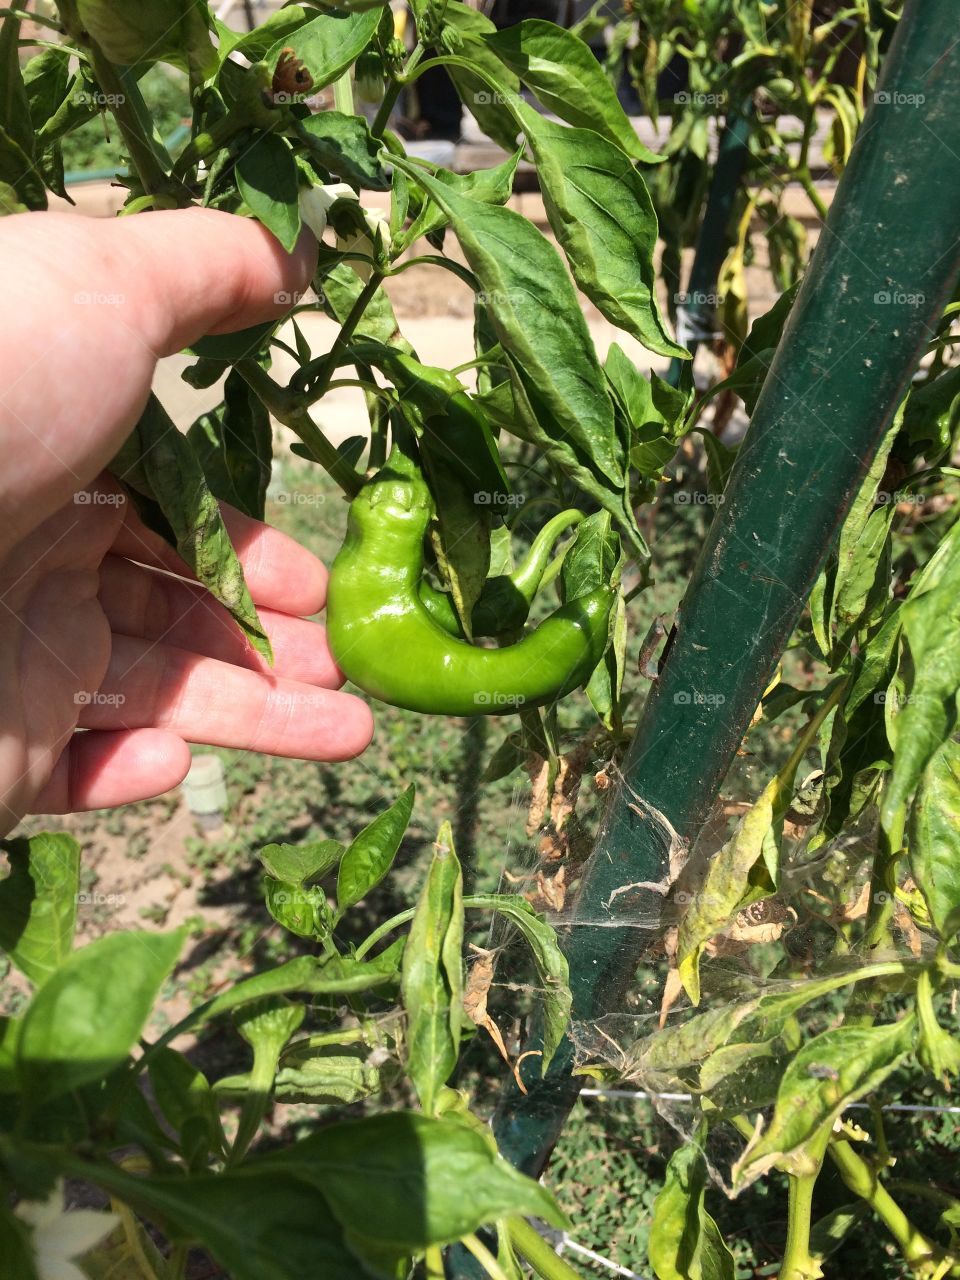 The peppers are growing 